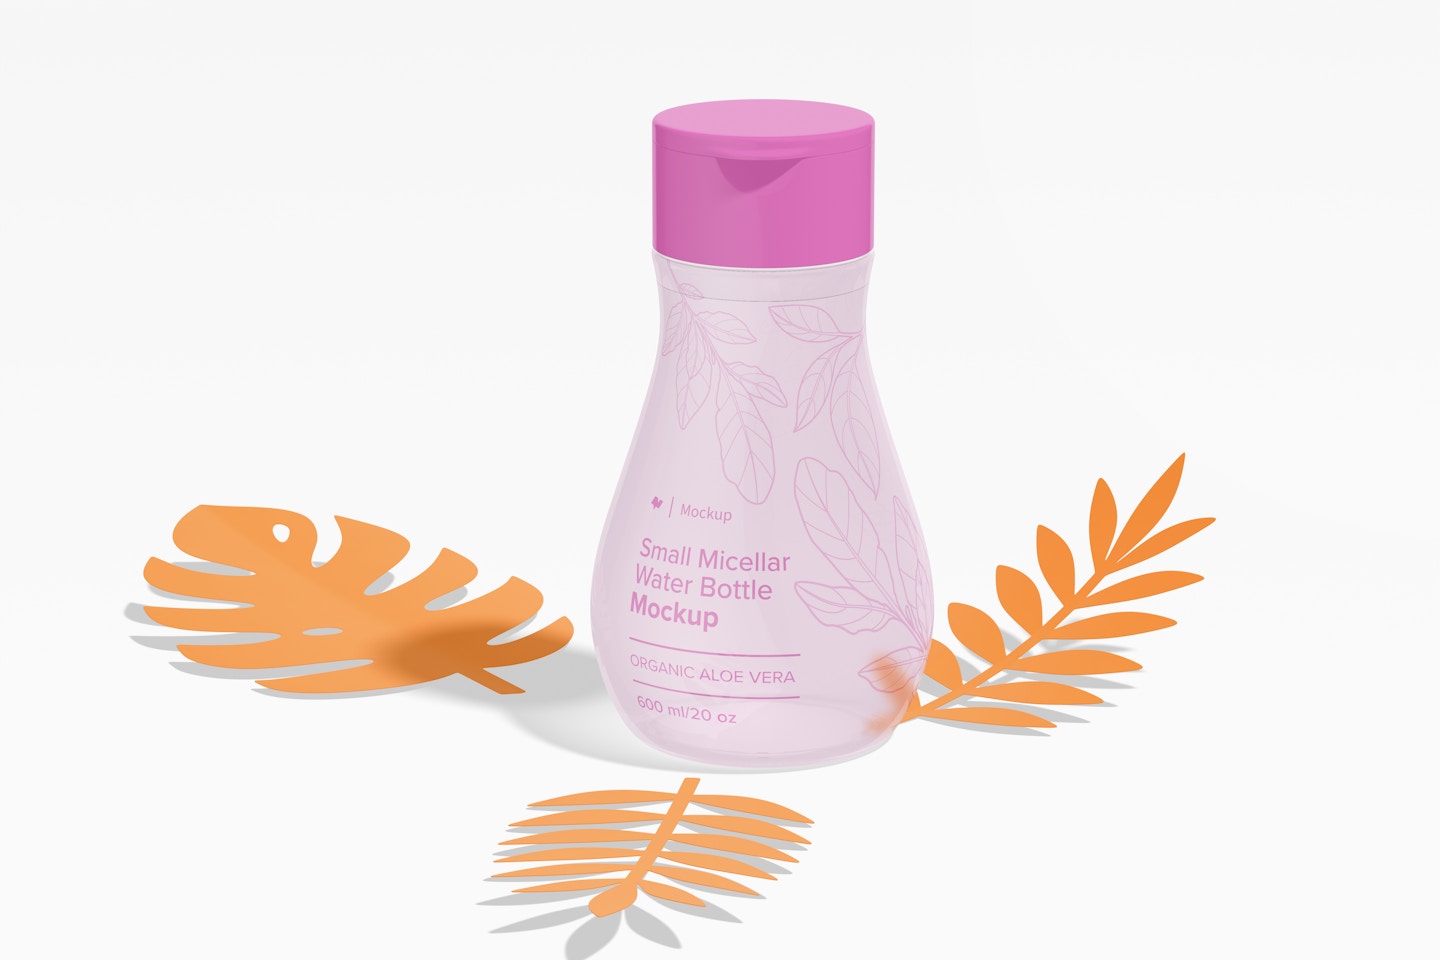 Small Micellar Water Bottle Mockup, Front View